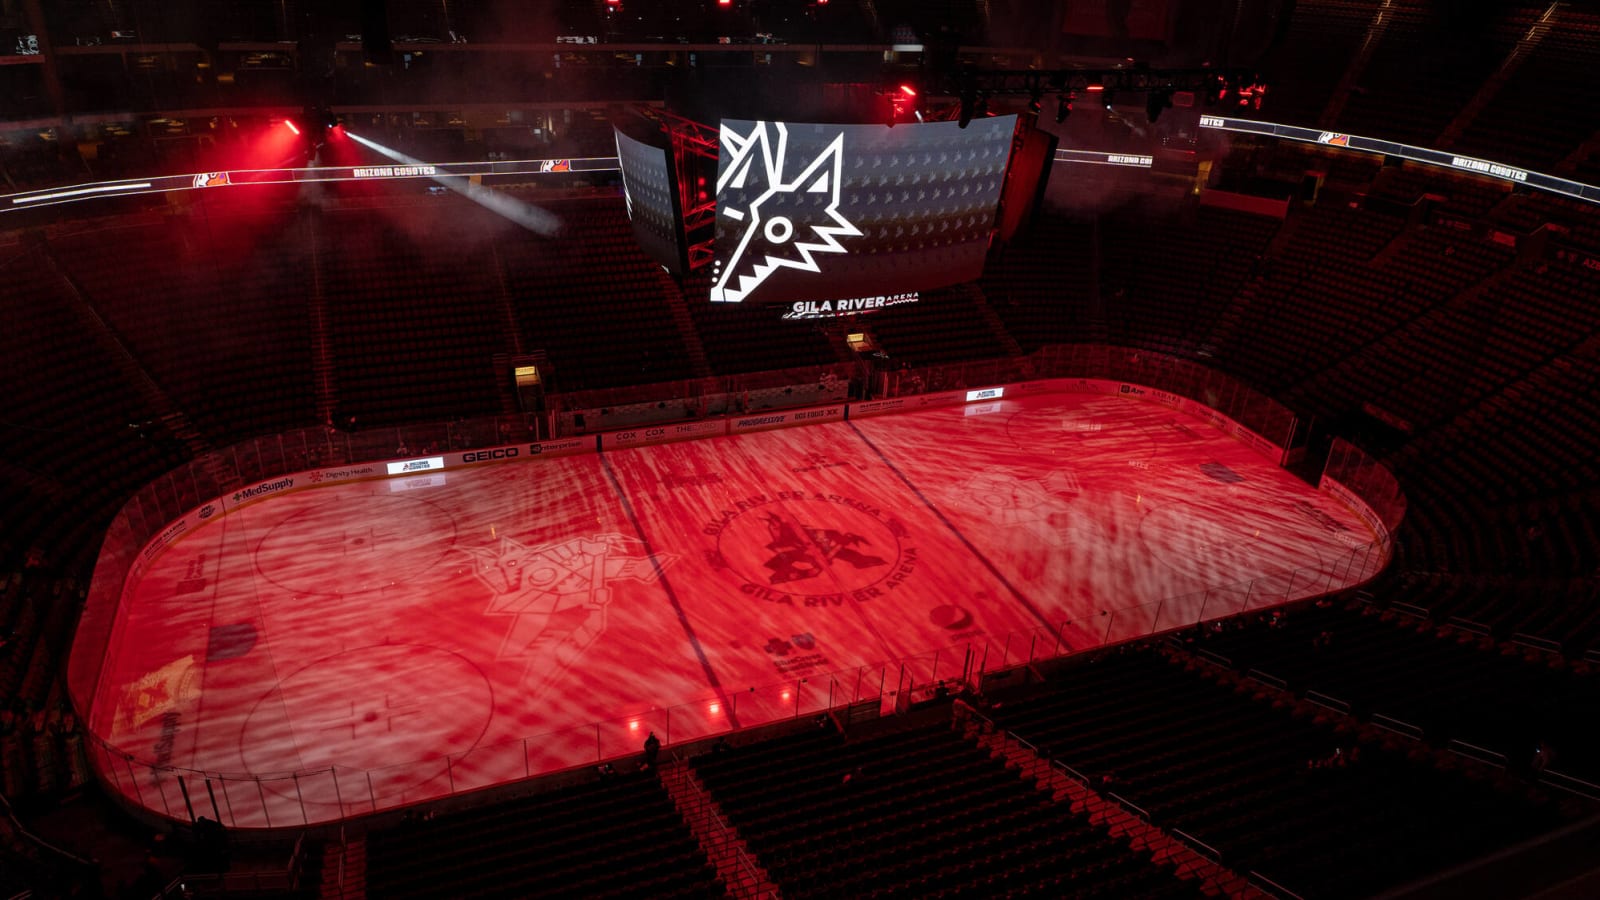 Report: Coyotes players upset with ‘even worse’ conditions at new ASU arena